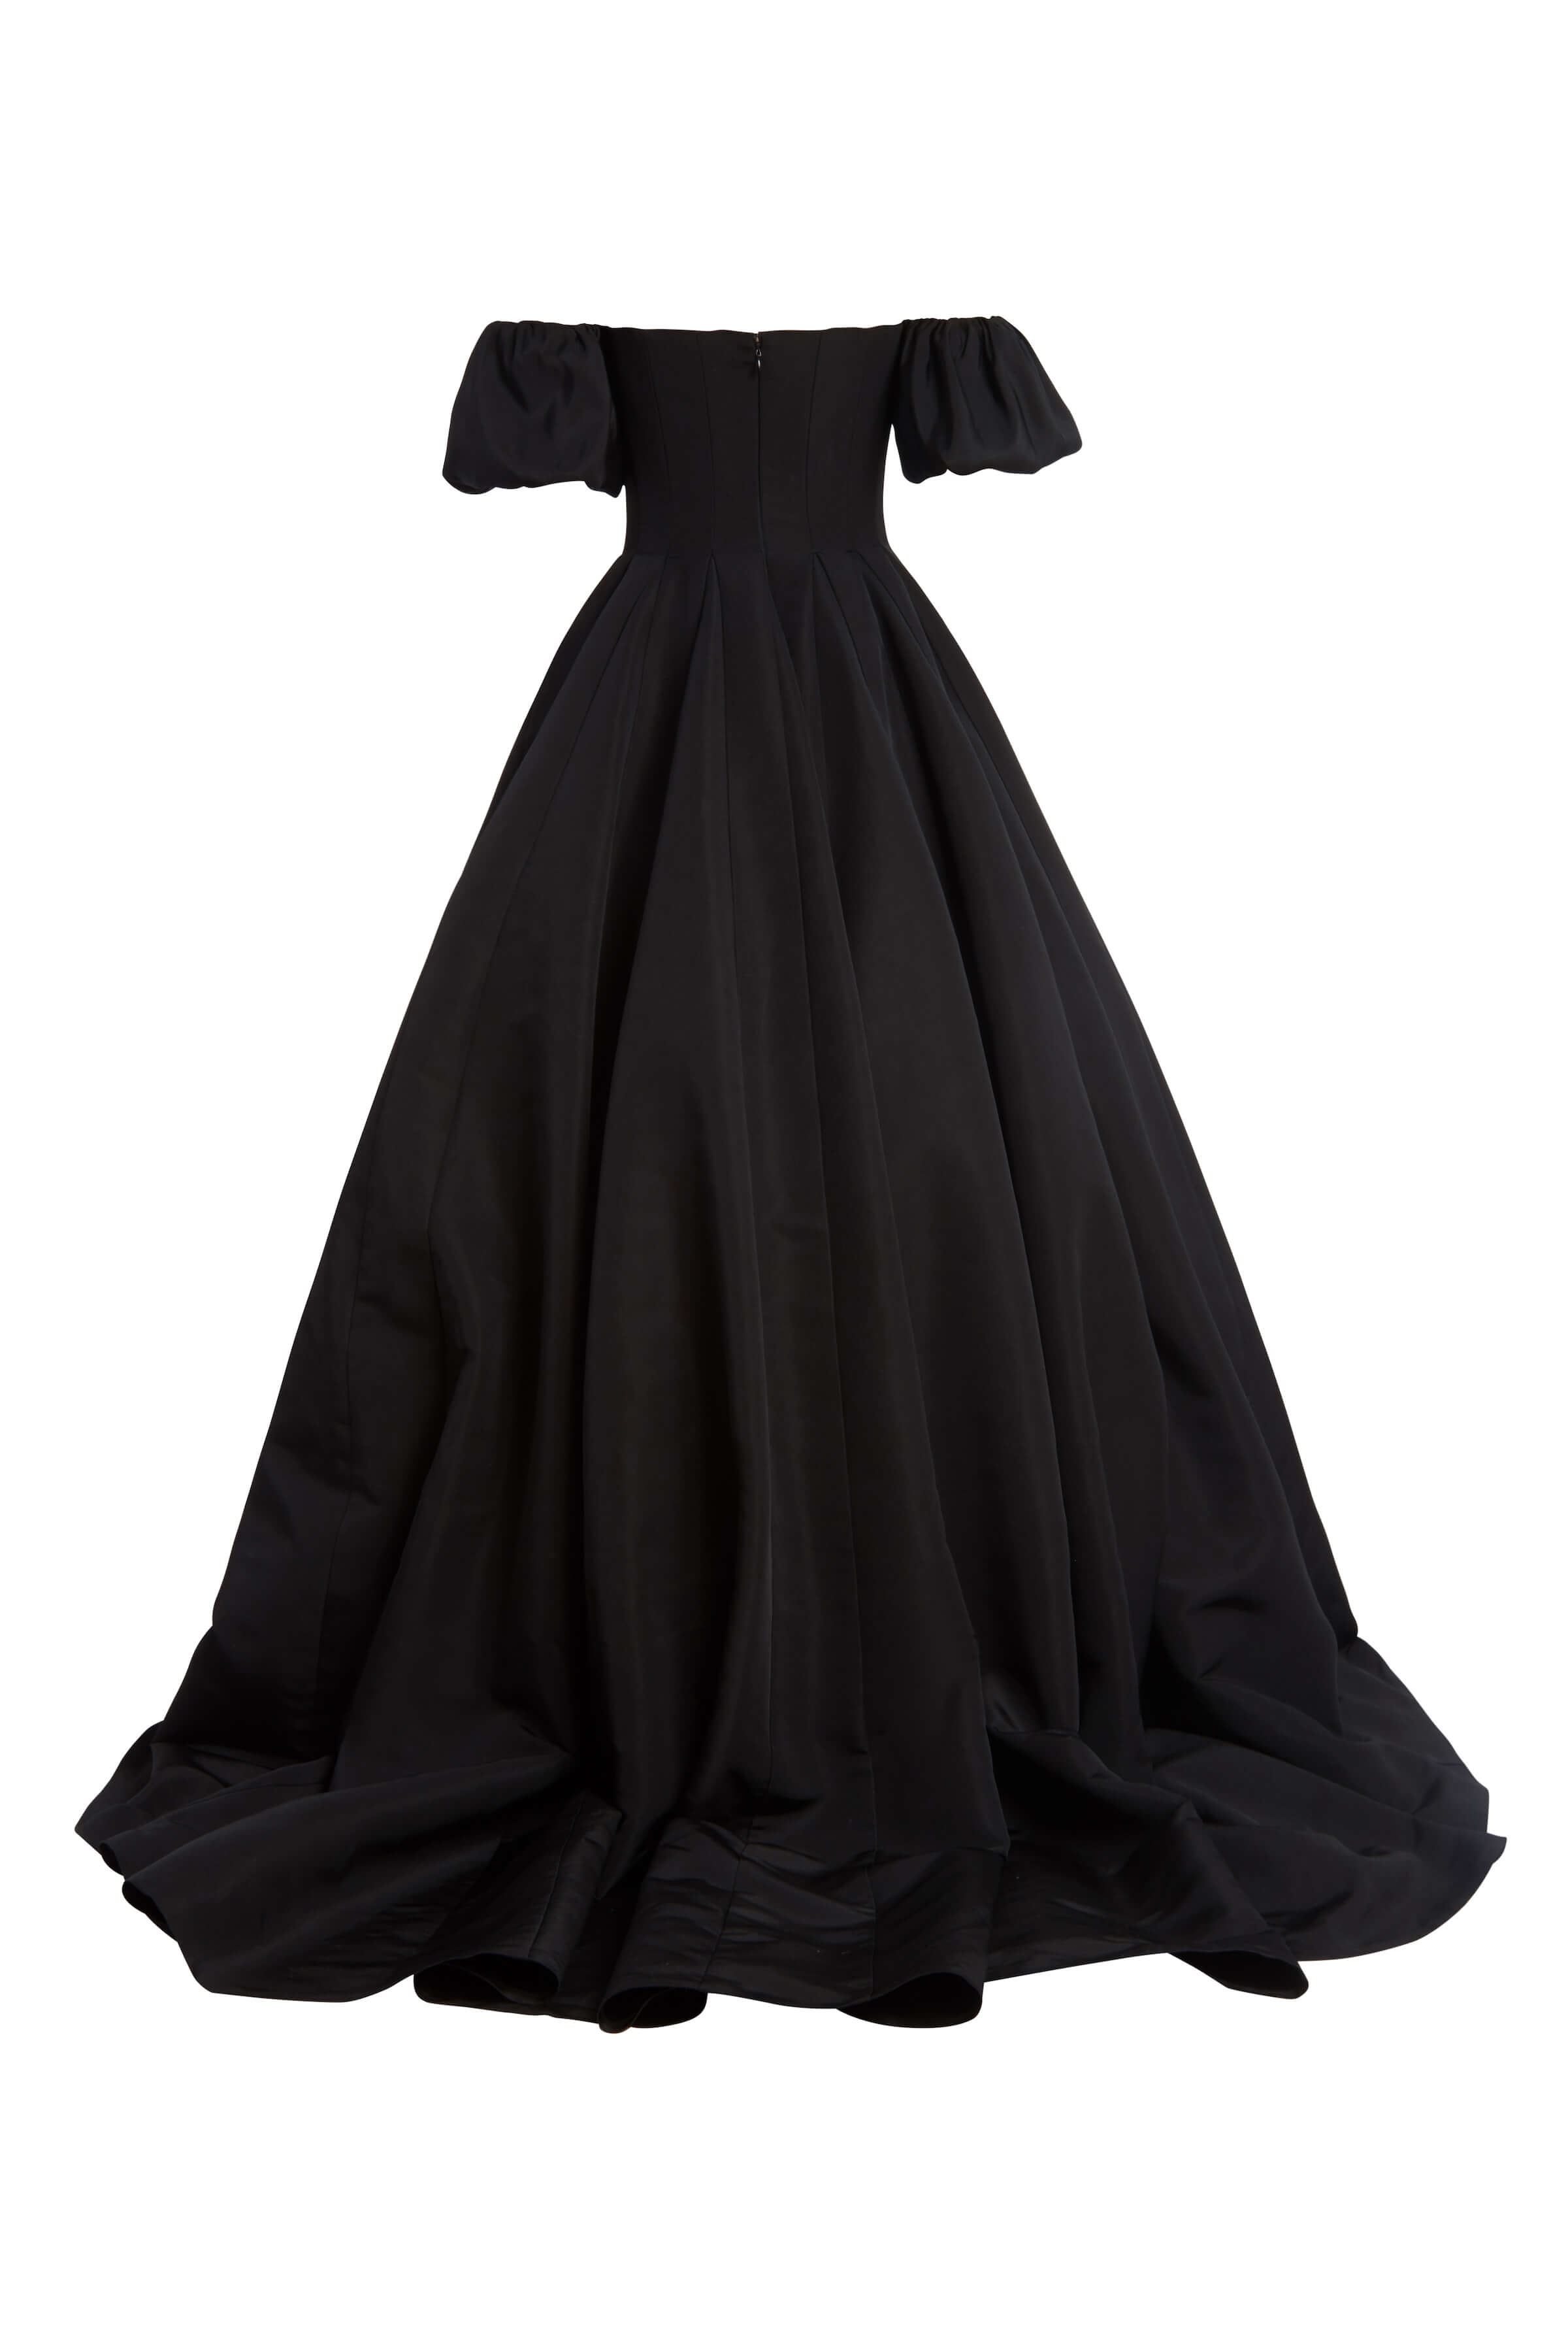 Thalia Black Silk Faille Gown With Off-The-Shoulder Puff Sleeves